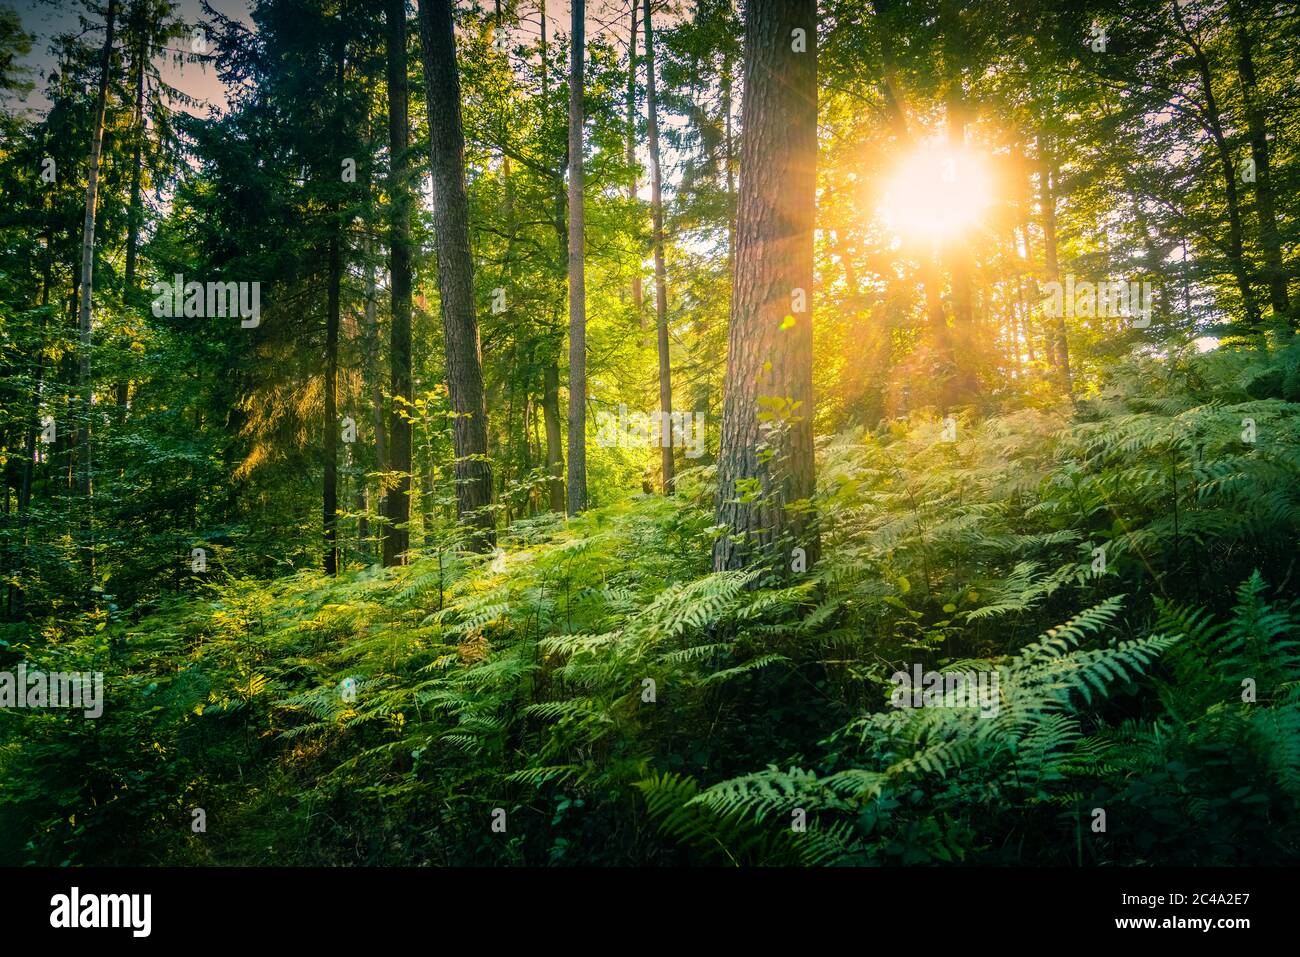 The evening sun shines through the foliage of the trees at the UNESCO Biosphere Reserve Palatinate Forest. Stock Photo